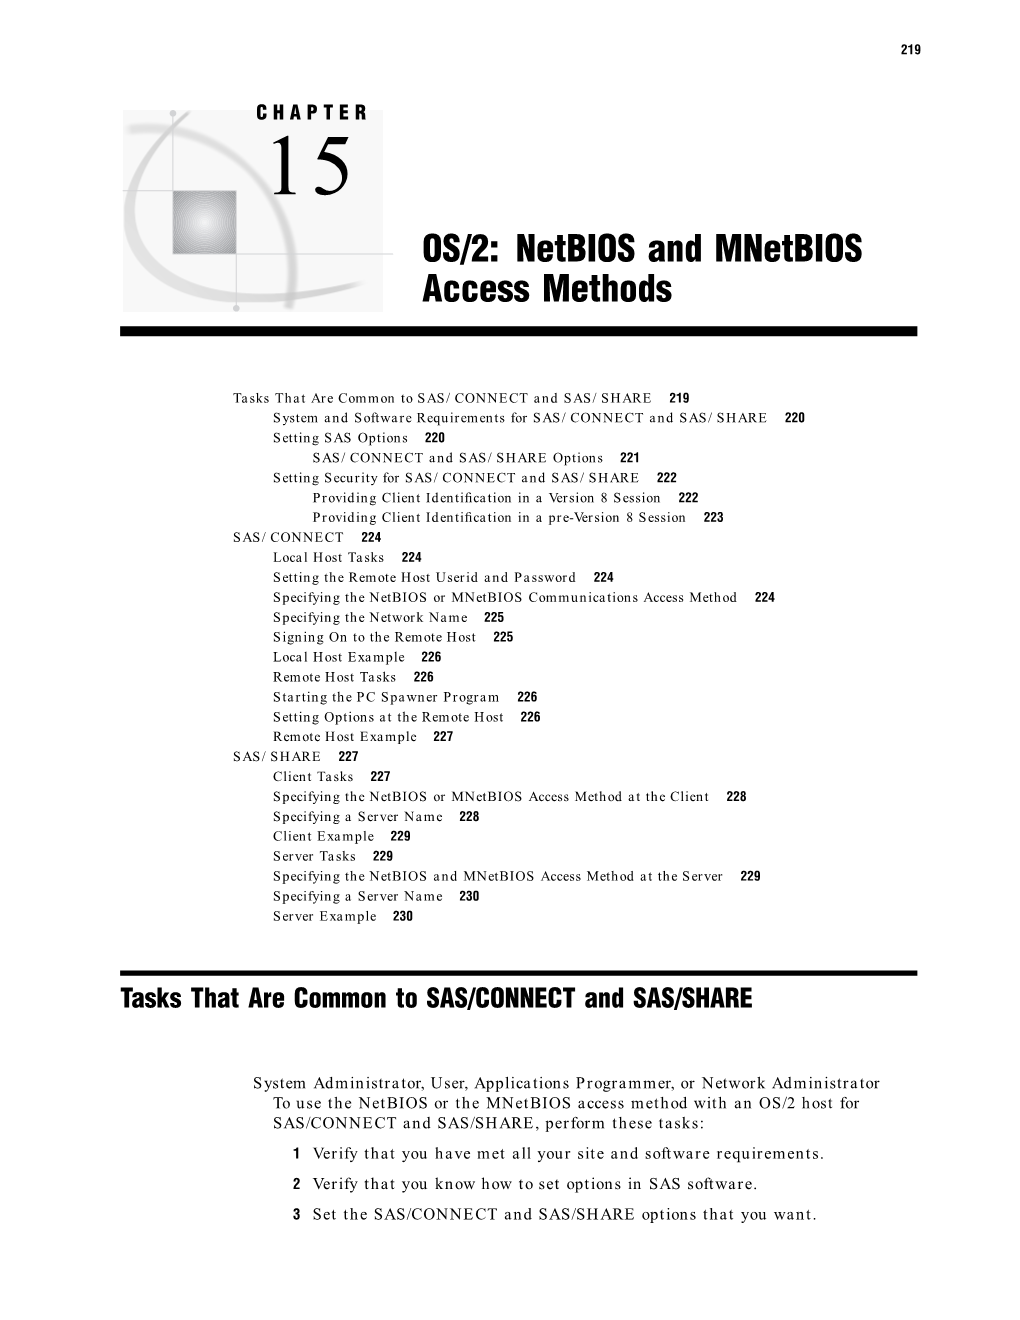 OS/2: Netbios and Mnetbios Access Methods